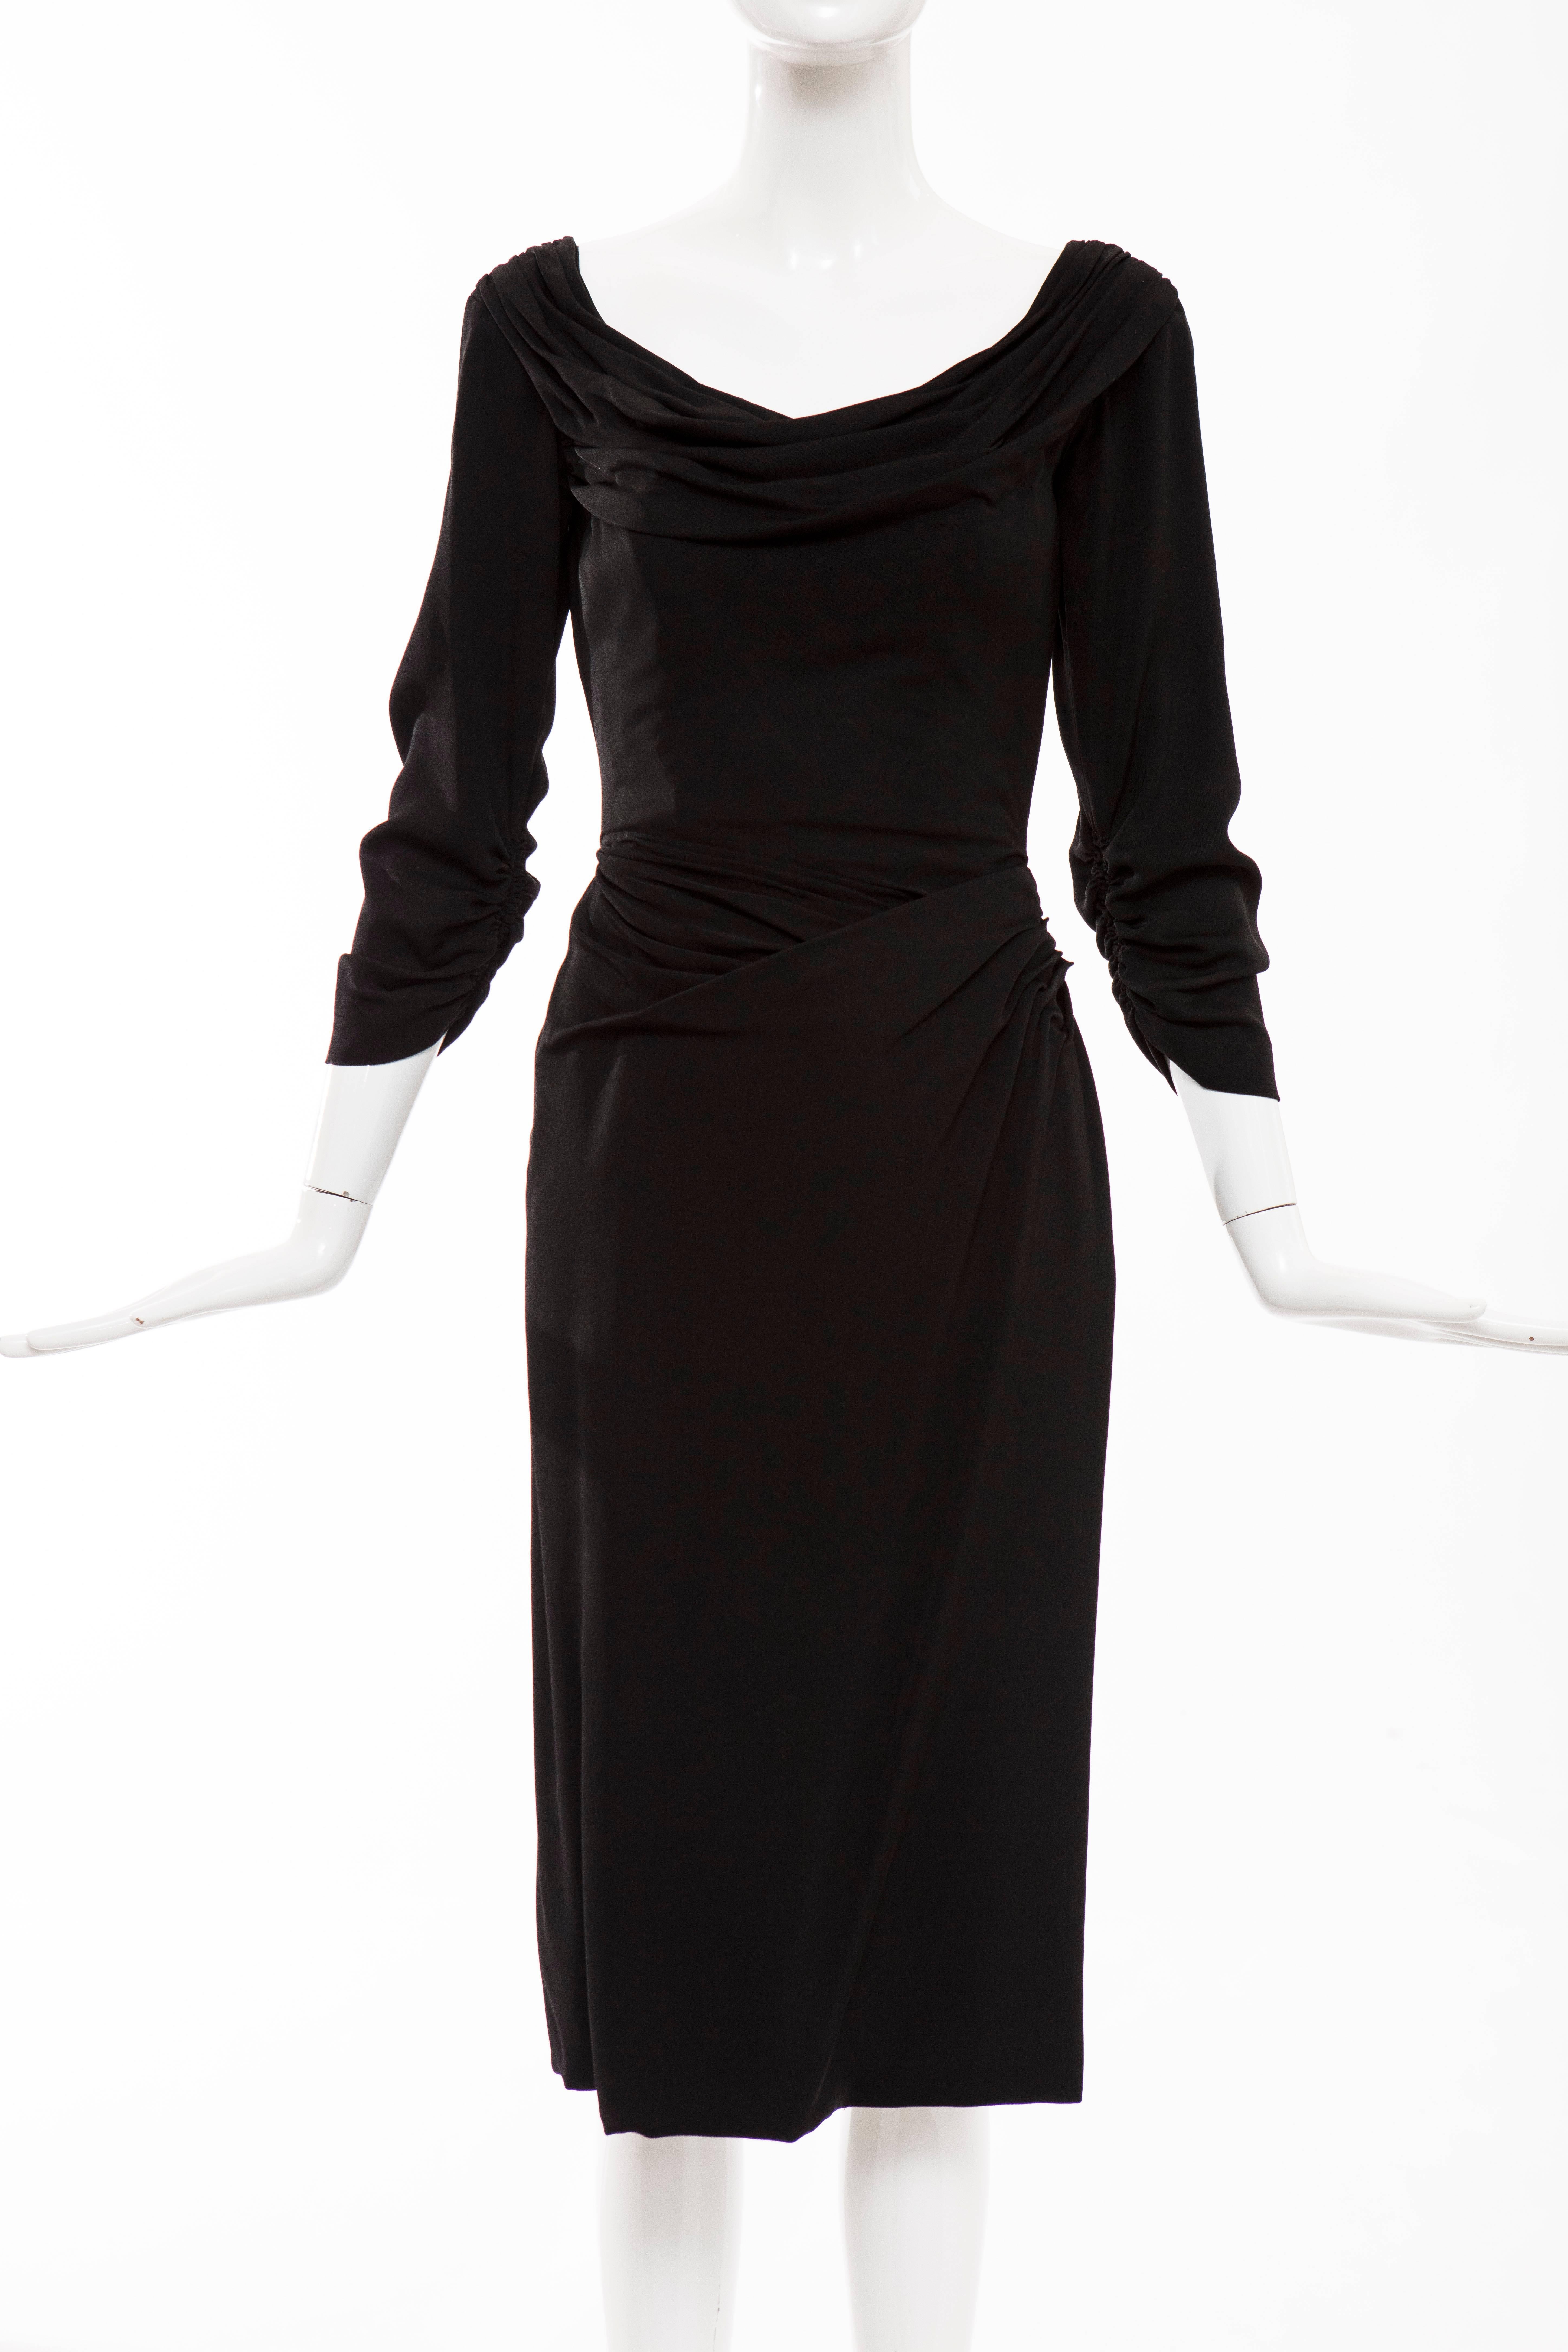 Ceil Chapman black dress with slight off the shoulder with ruched waist and back zipper.